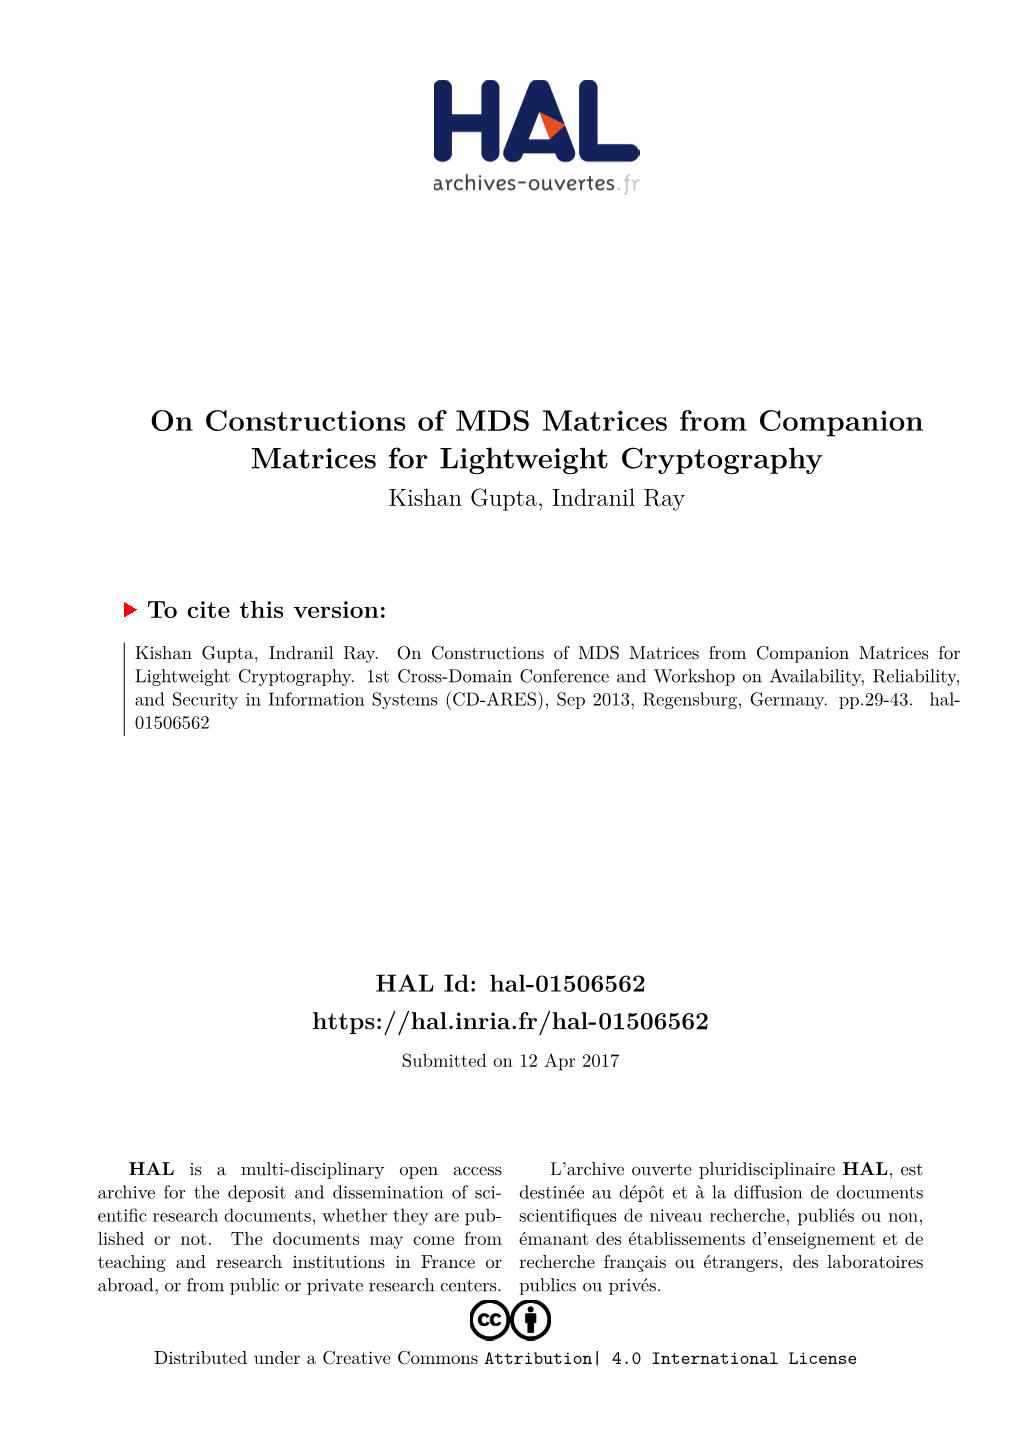 On Constructions of MDS Matrices from Companion Matrices for Lightweight Cryptography Kishan Gupta, Indranil Ray